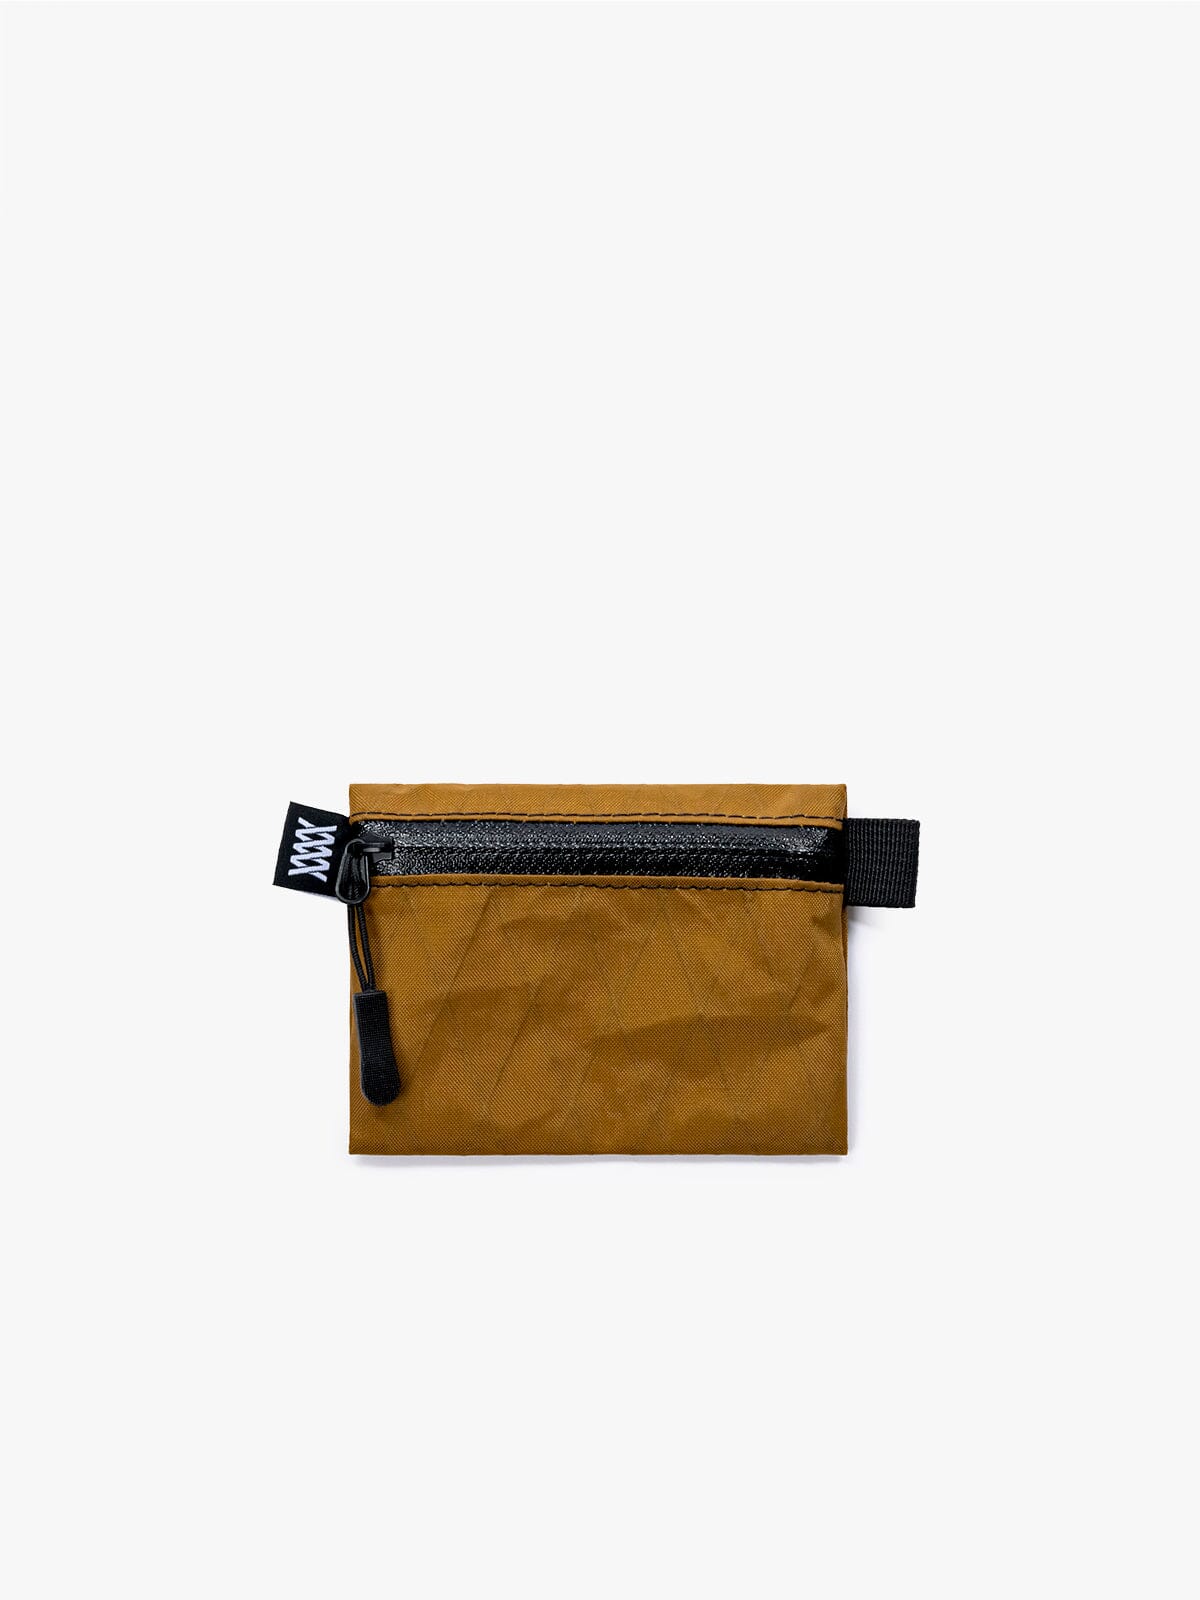 VX Wallet & Utility Pouch by Mission Workshop - Weatherproof Bags & Technical Apparel - San Francisco & Los Angeles - Built to endure - Guaranteed forever